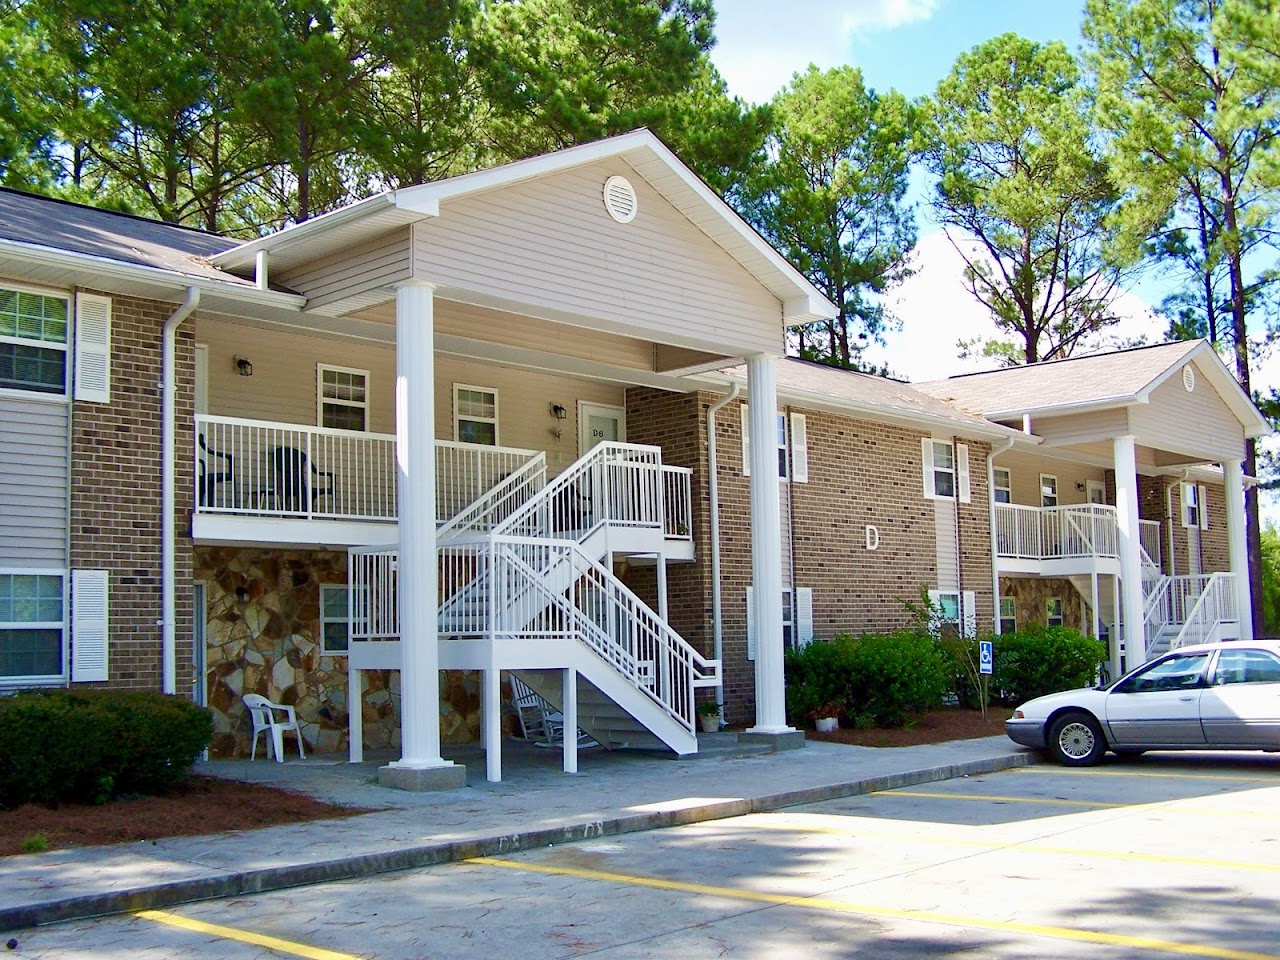 Photo of GREEMBRIAR APARTMENTS. Affordable housing located at 131 BURKETTS FERRY RD HAZLEHURST, GA 31539